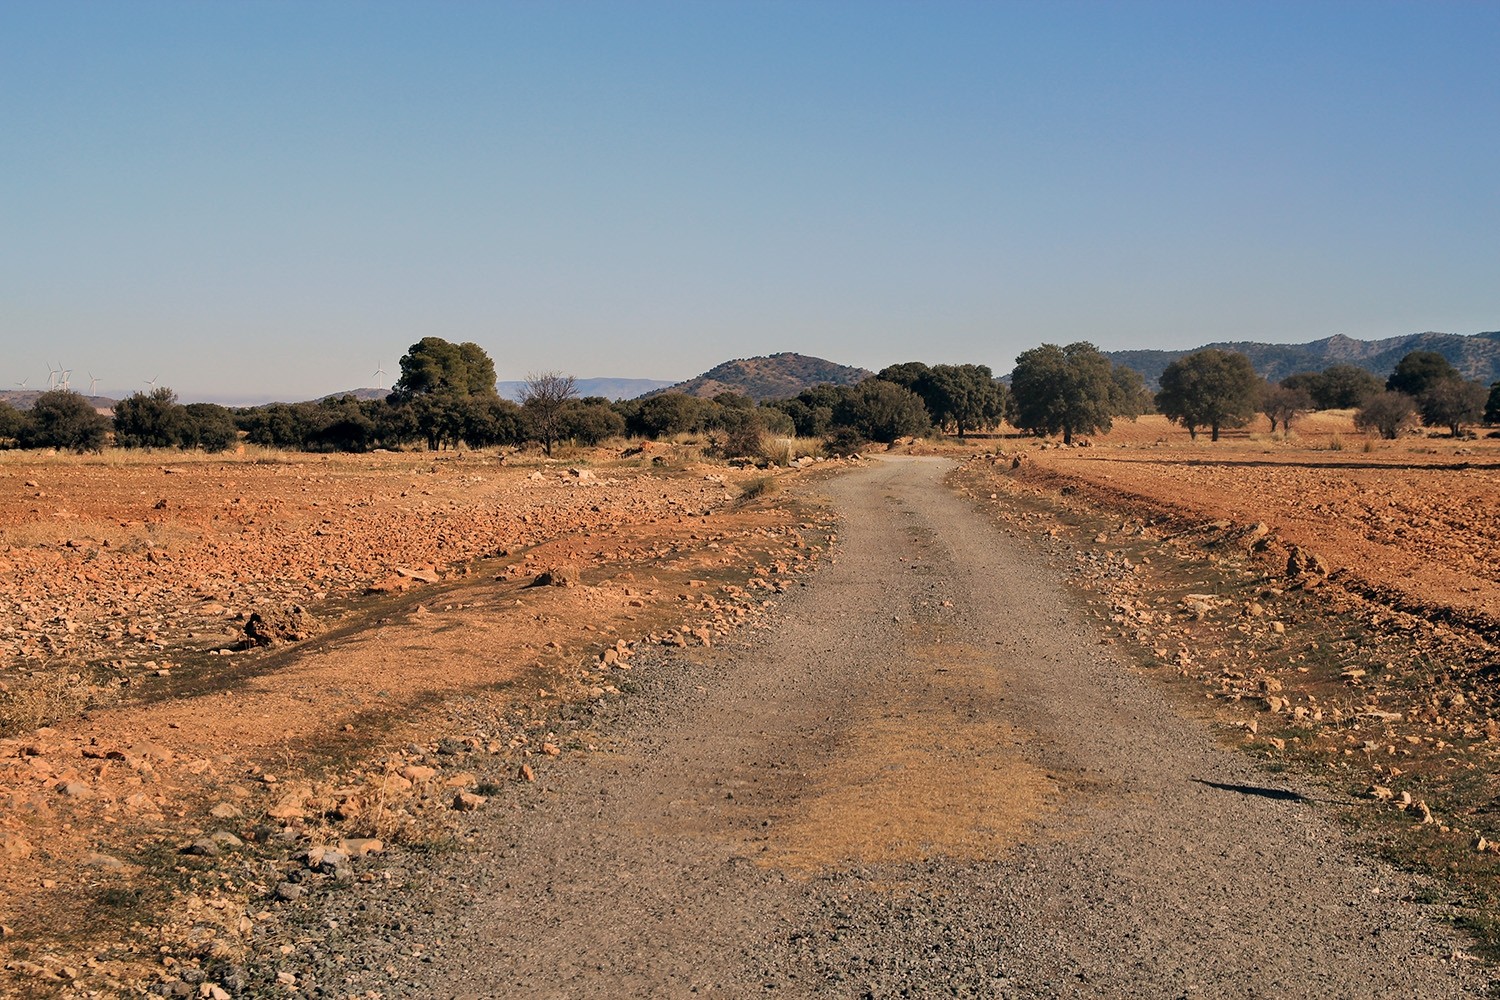 The dirt road (access from the main road)